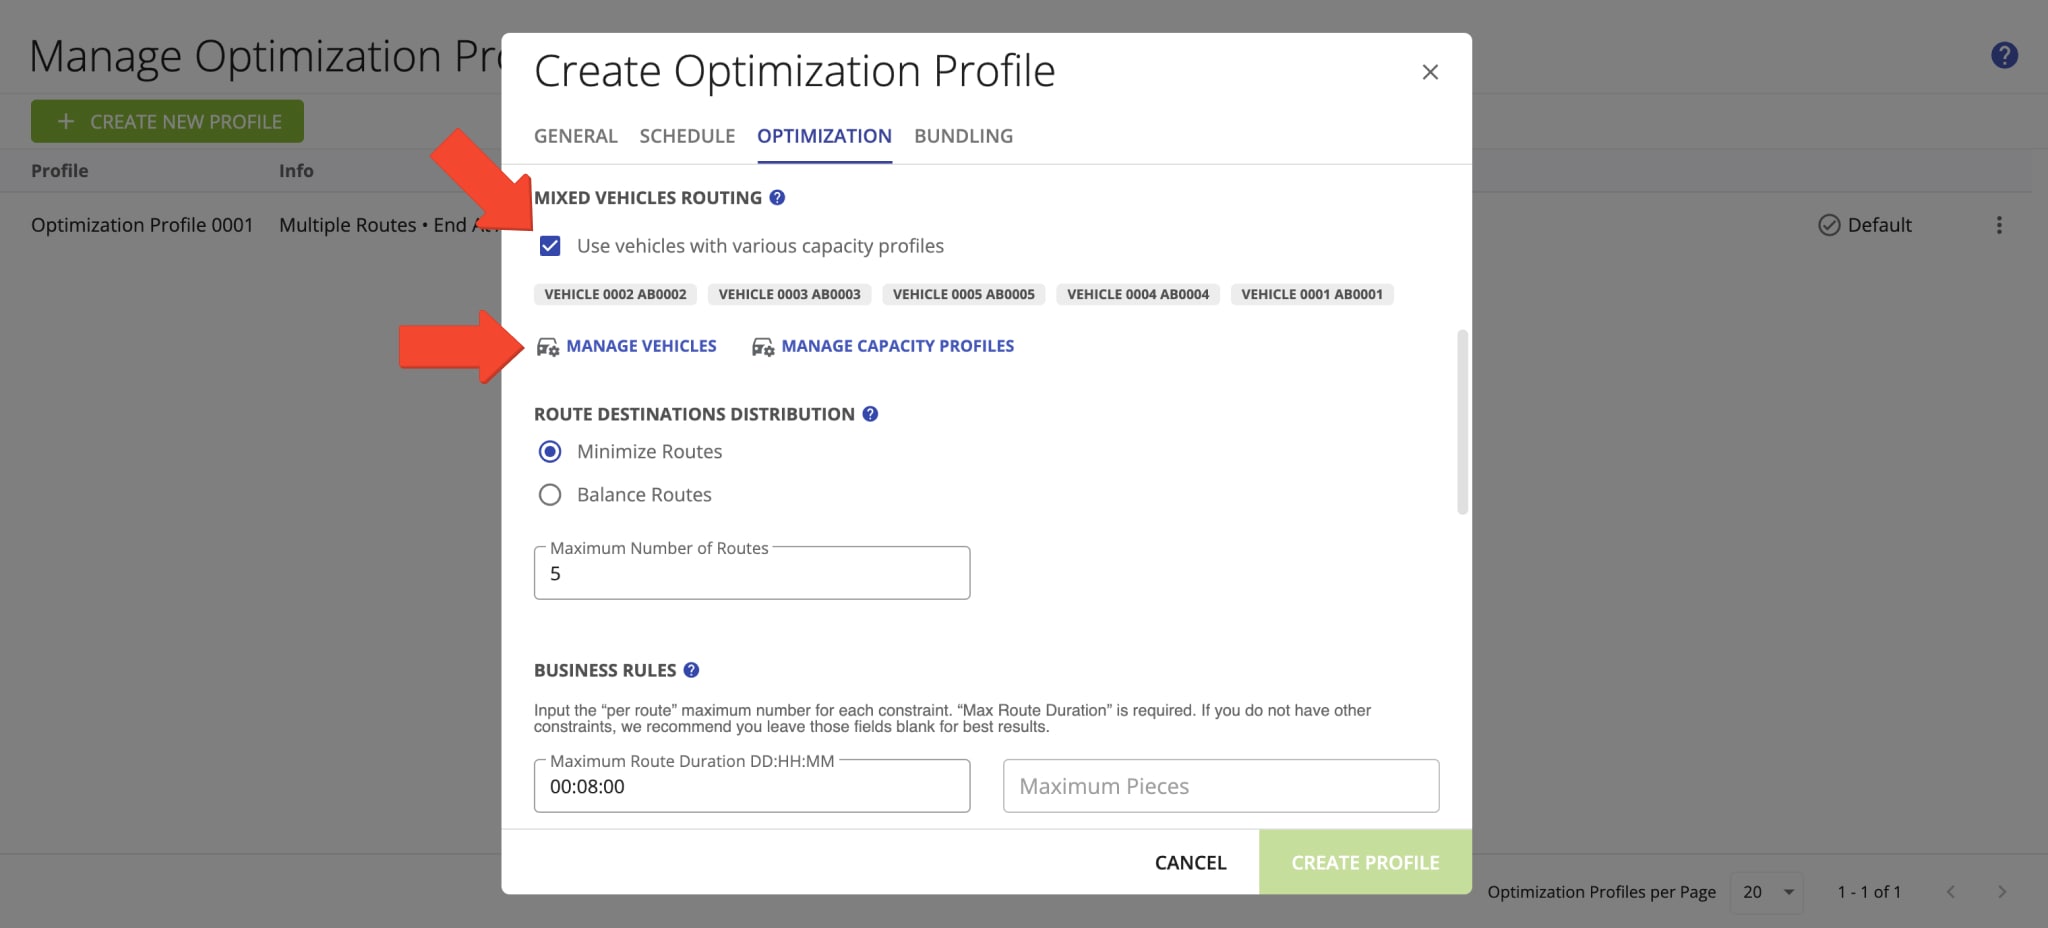 When creating or editing an existing Optimization Profile, go to the Optimization tab. Then, check 'Use vehicles with various capacity profiles' to enable mixed fleet routing.